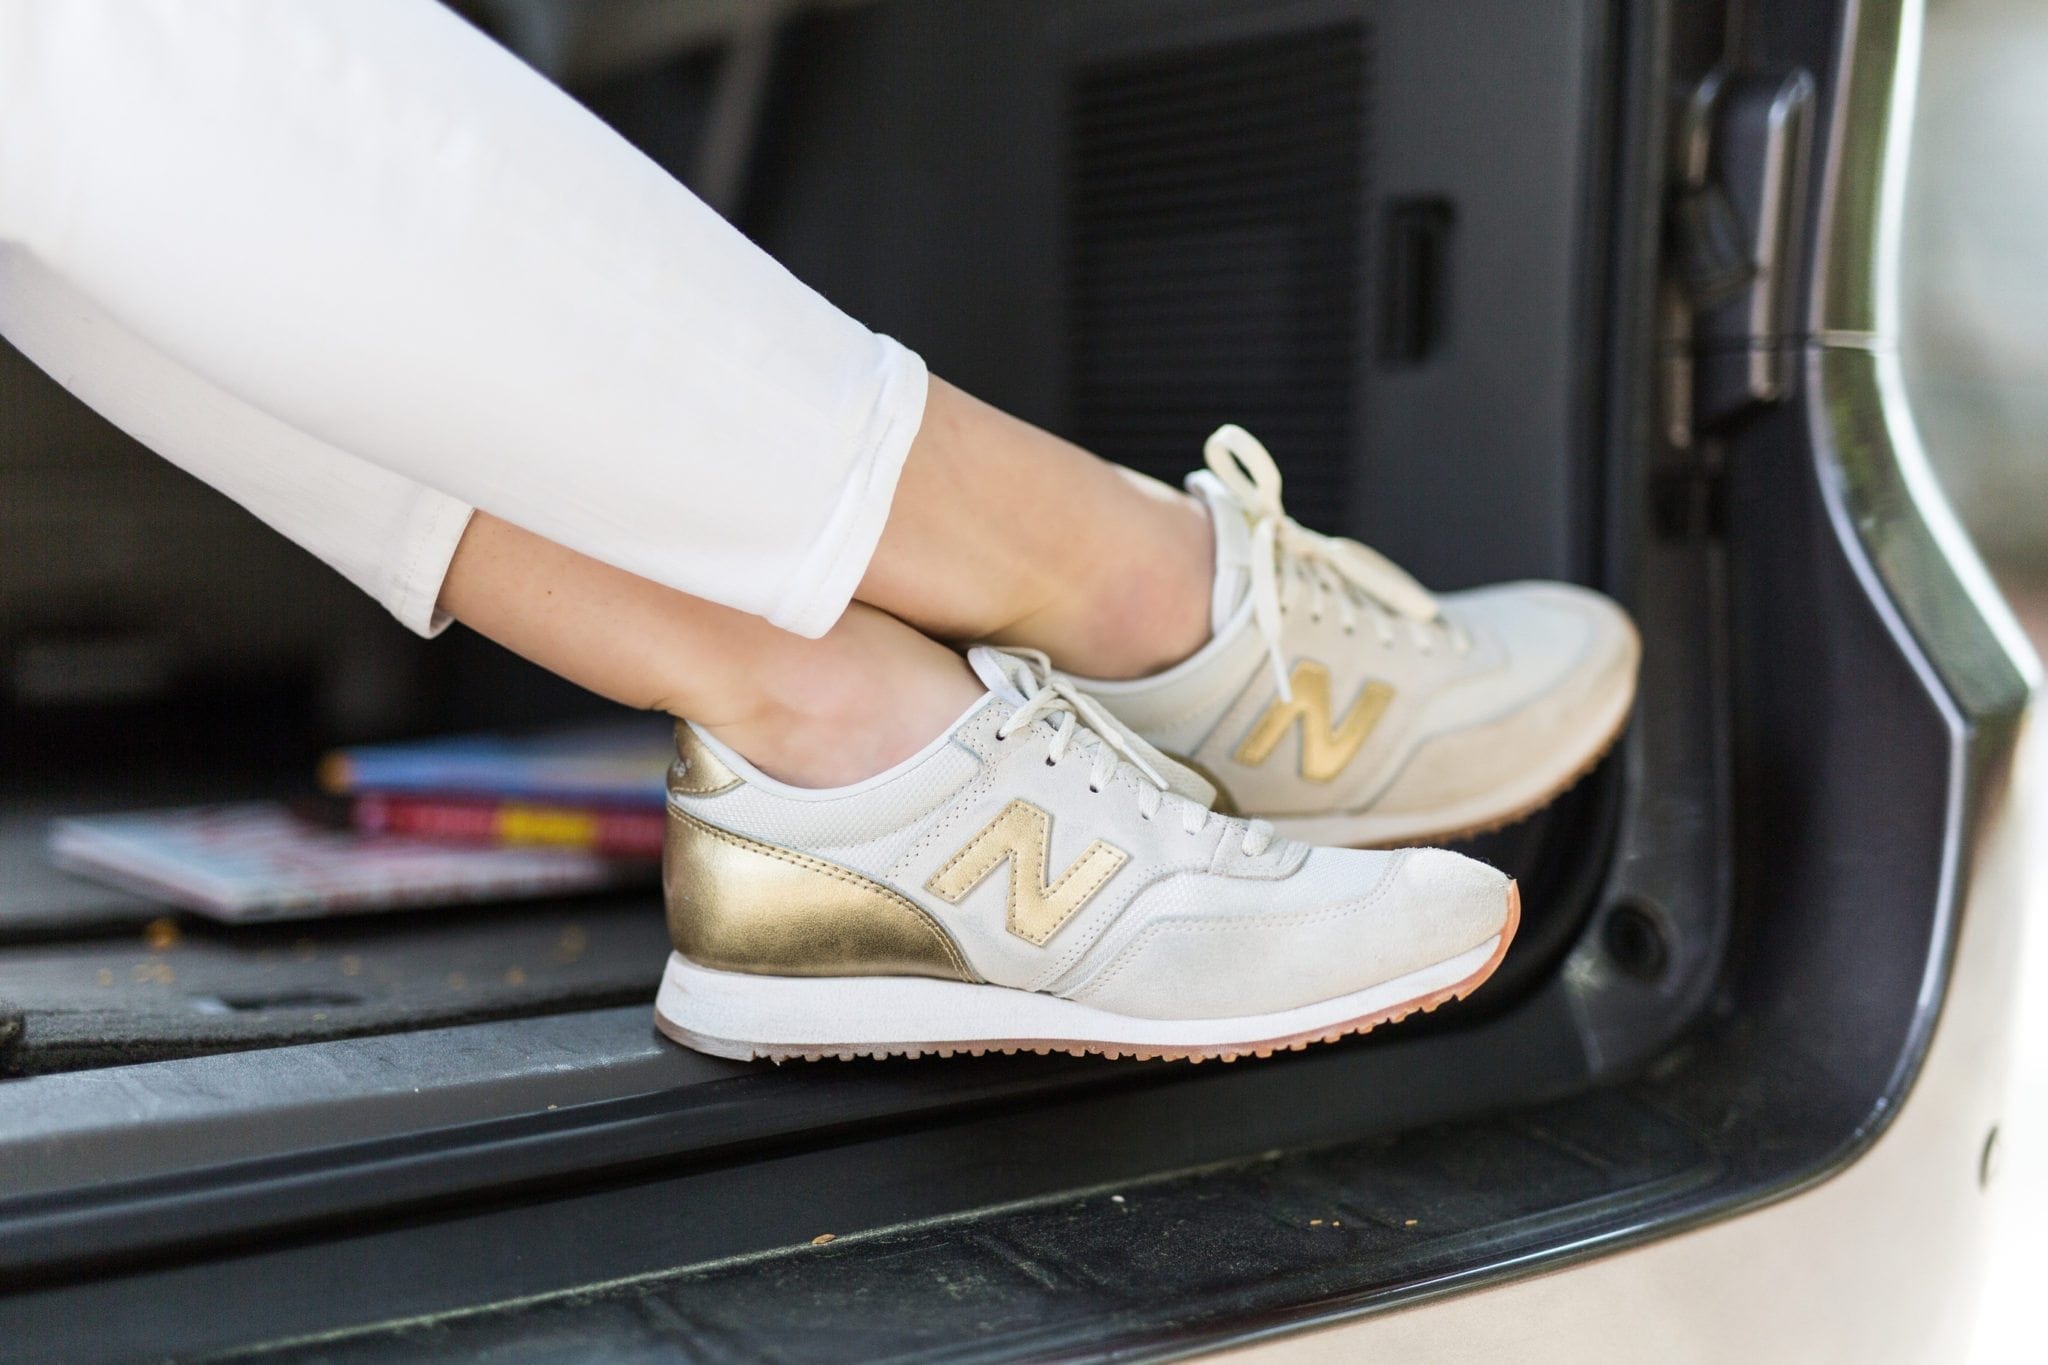 gold and white tennis shoes. New Balance shoes from J Crew on sale.